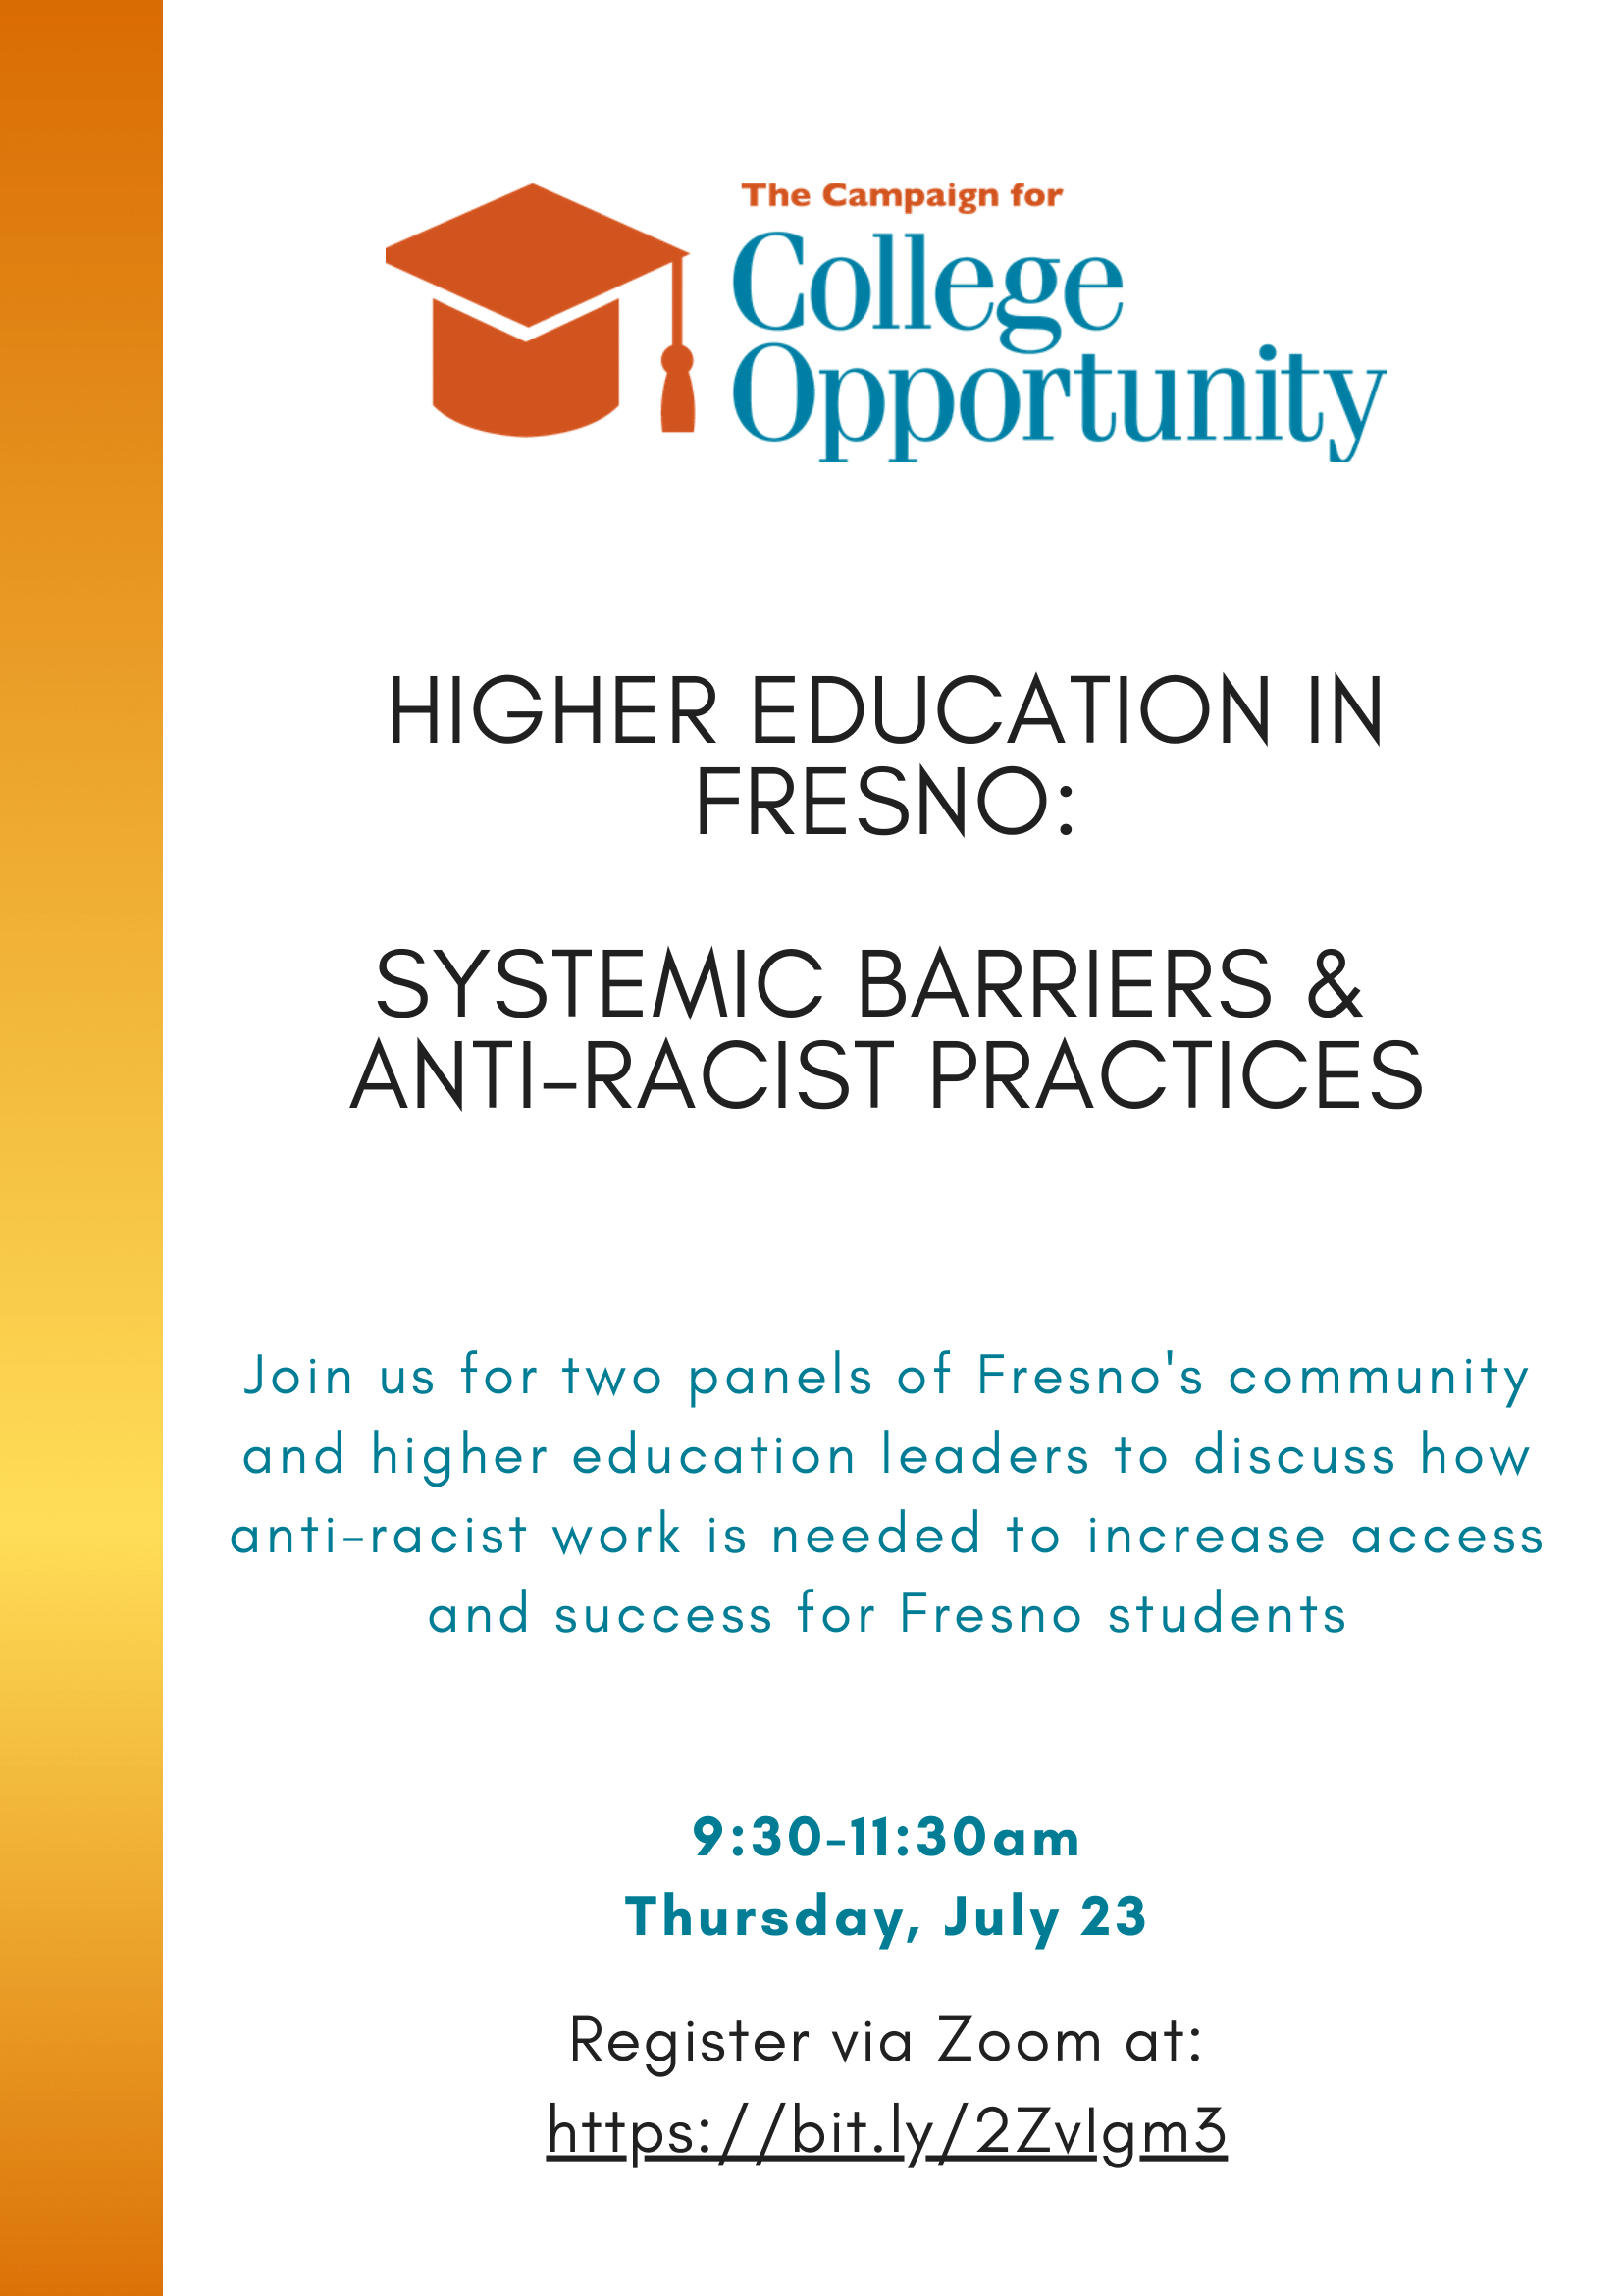 Fresno Higher Ed. Engagement Hub: Systemic Barriers & Anti-Racist Solutions to Access & Success